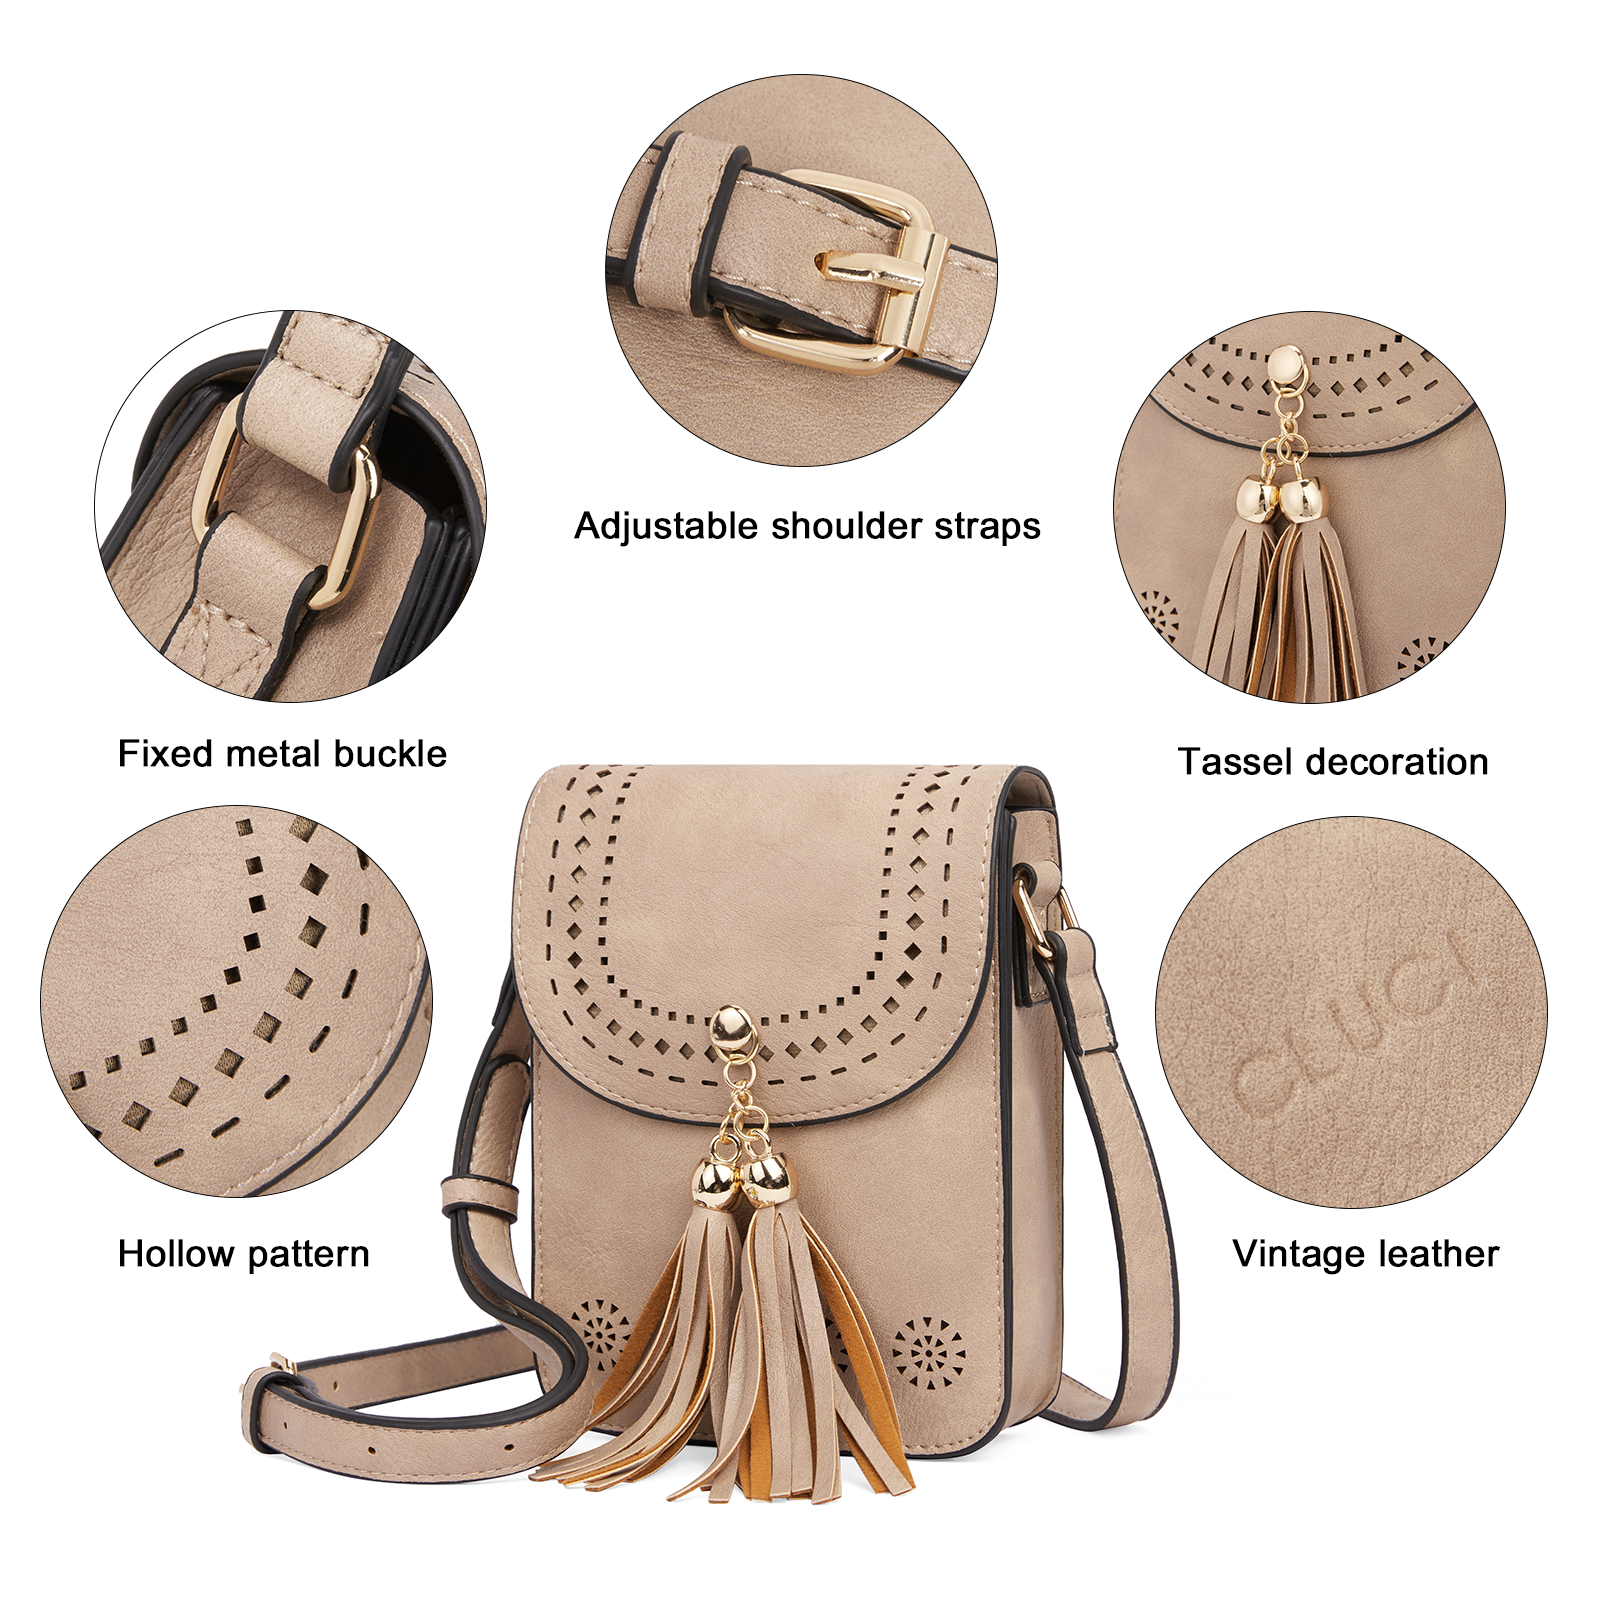 CLUCI Small Crossbody Bags for Women Trendy, Vegan Leather Cell Phone Purse Wallet with Tassel and Adjustable Strap